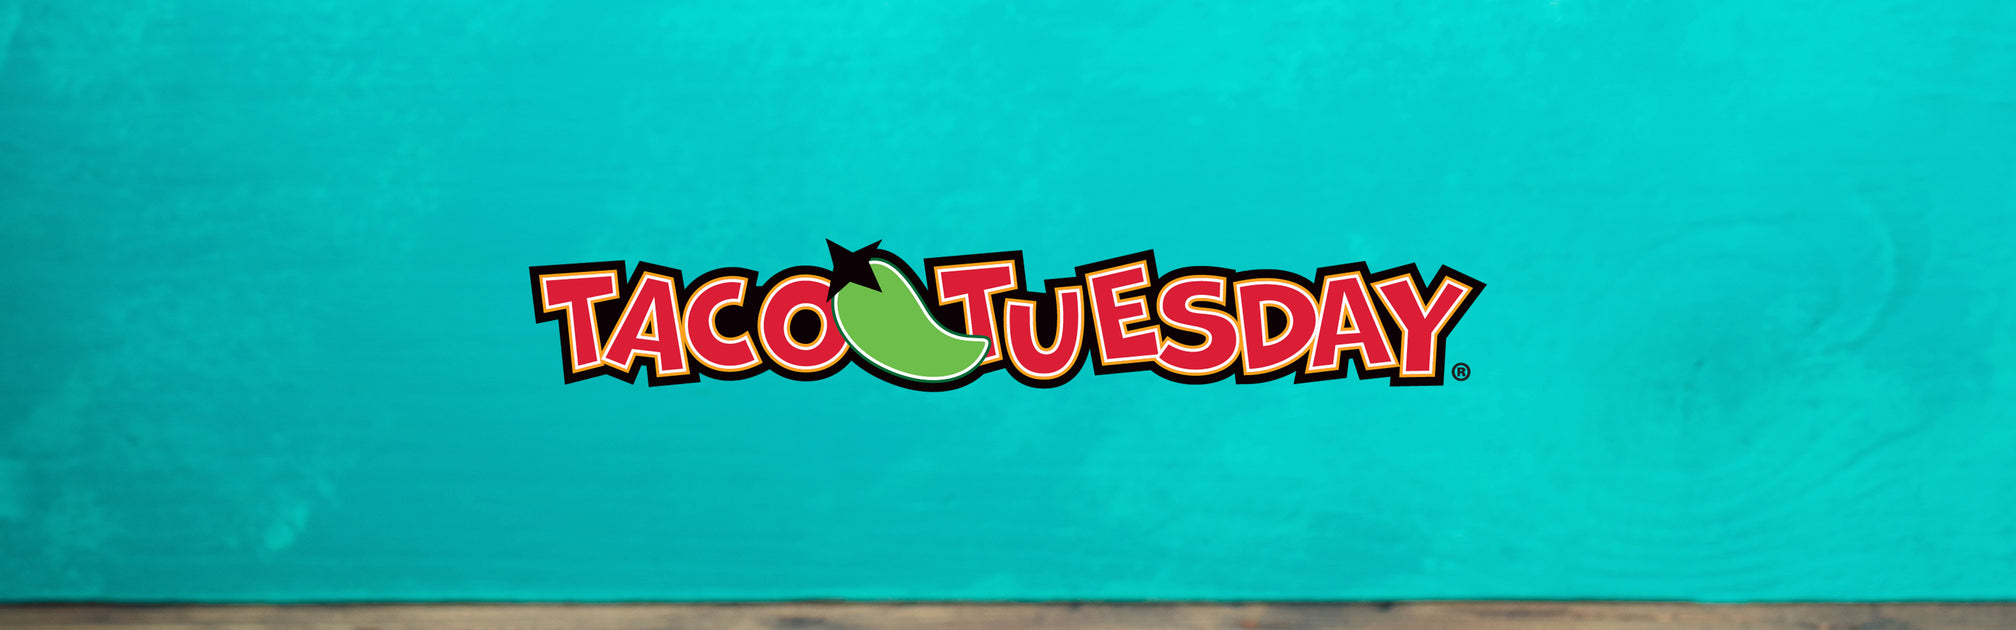 Nostalgia - Guess what day it is TACO TUESDAY! A timeless tradition made  more convenient. Family and friends can gather around to enjoy authentic  Mexican meals with our new Taco Tuesday line 